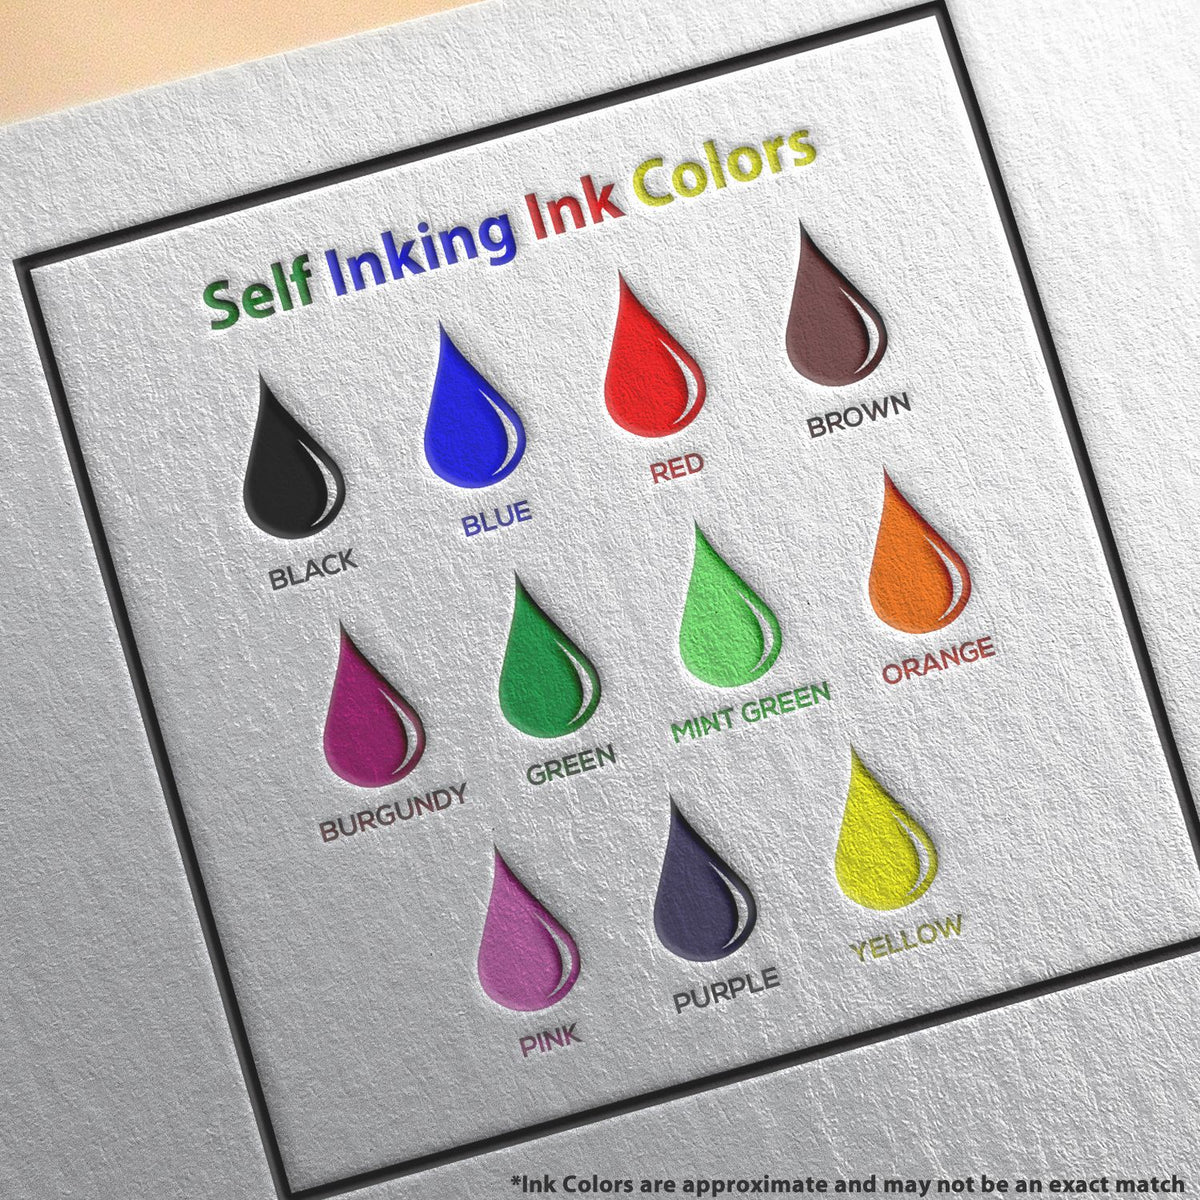 A picture showing the different ink colors or hues available for the Self-Inking New Mexico Landscape Architect Stamp product.